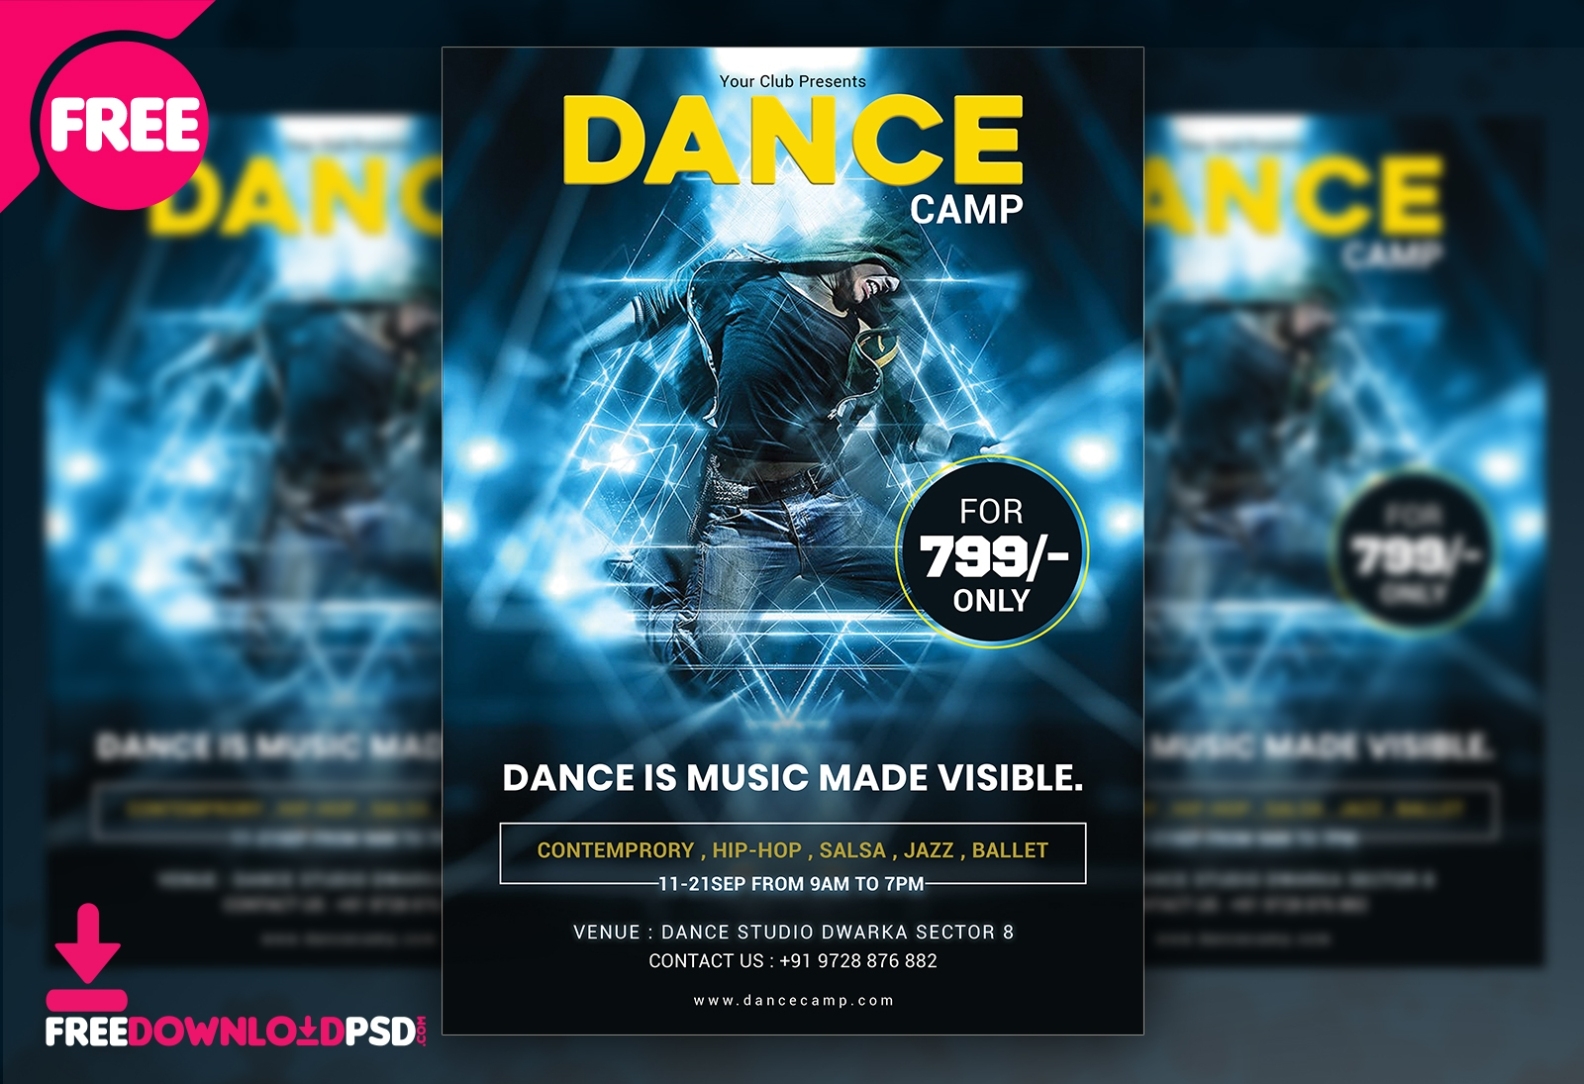 Dance Campaign Flyer Free Psd Template | Freedownloadpsd With Regard To Campaign Flyer Template